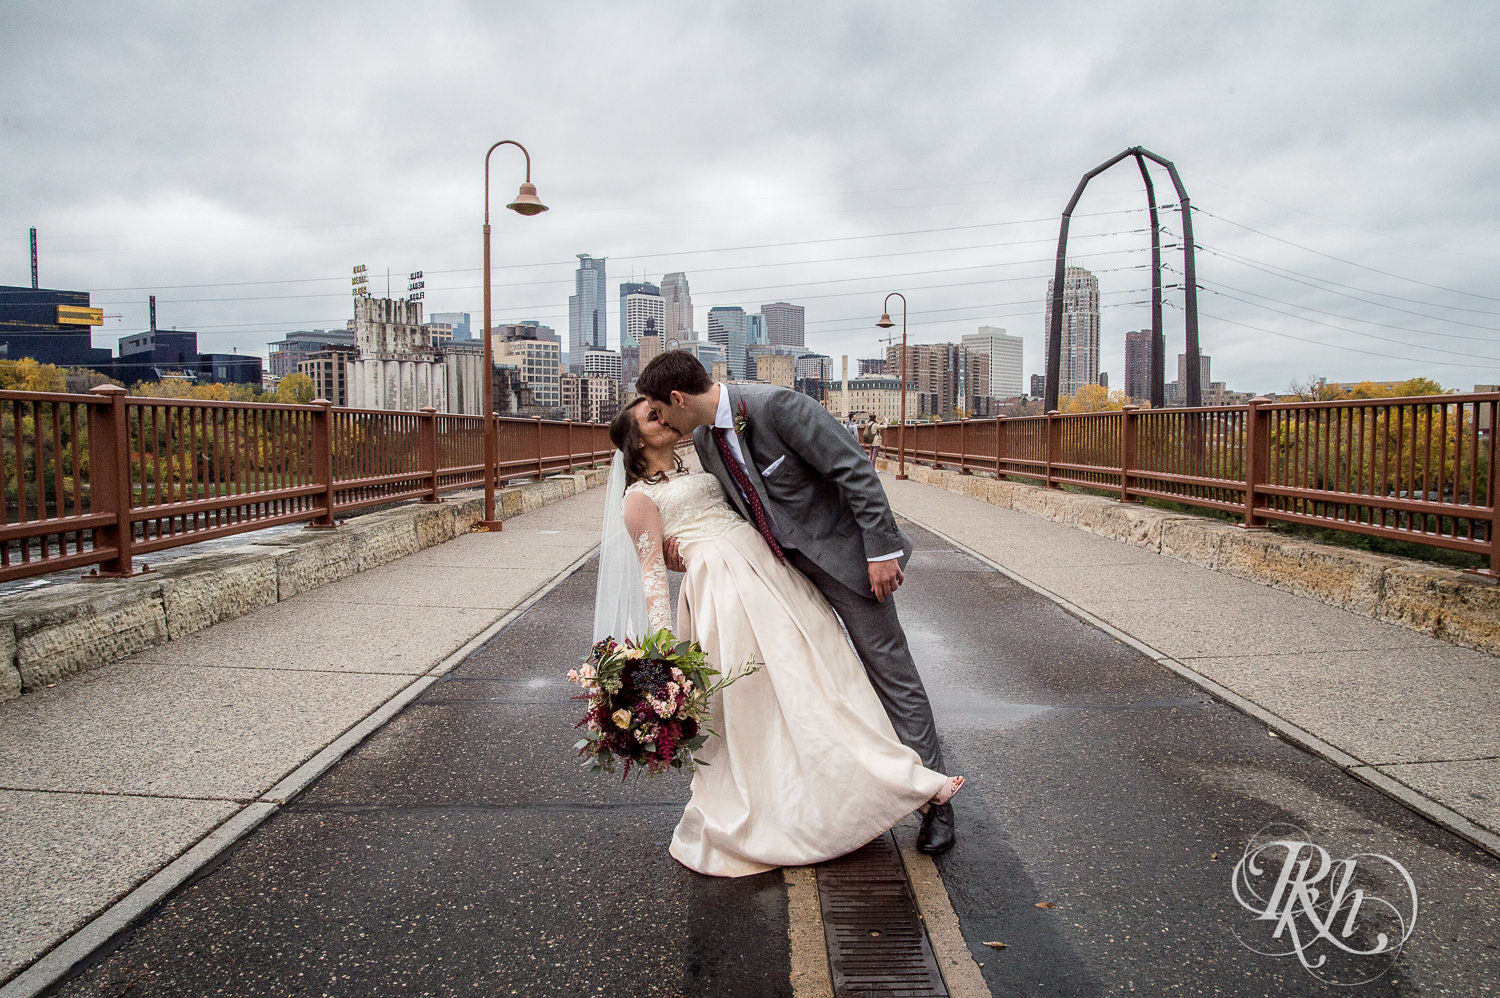 Bride and groom kiss at the Stone Arch Bridge on their rainy wedding day in Minneapolis, Minnesota.